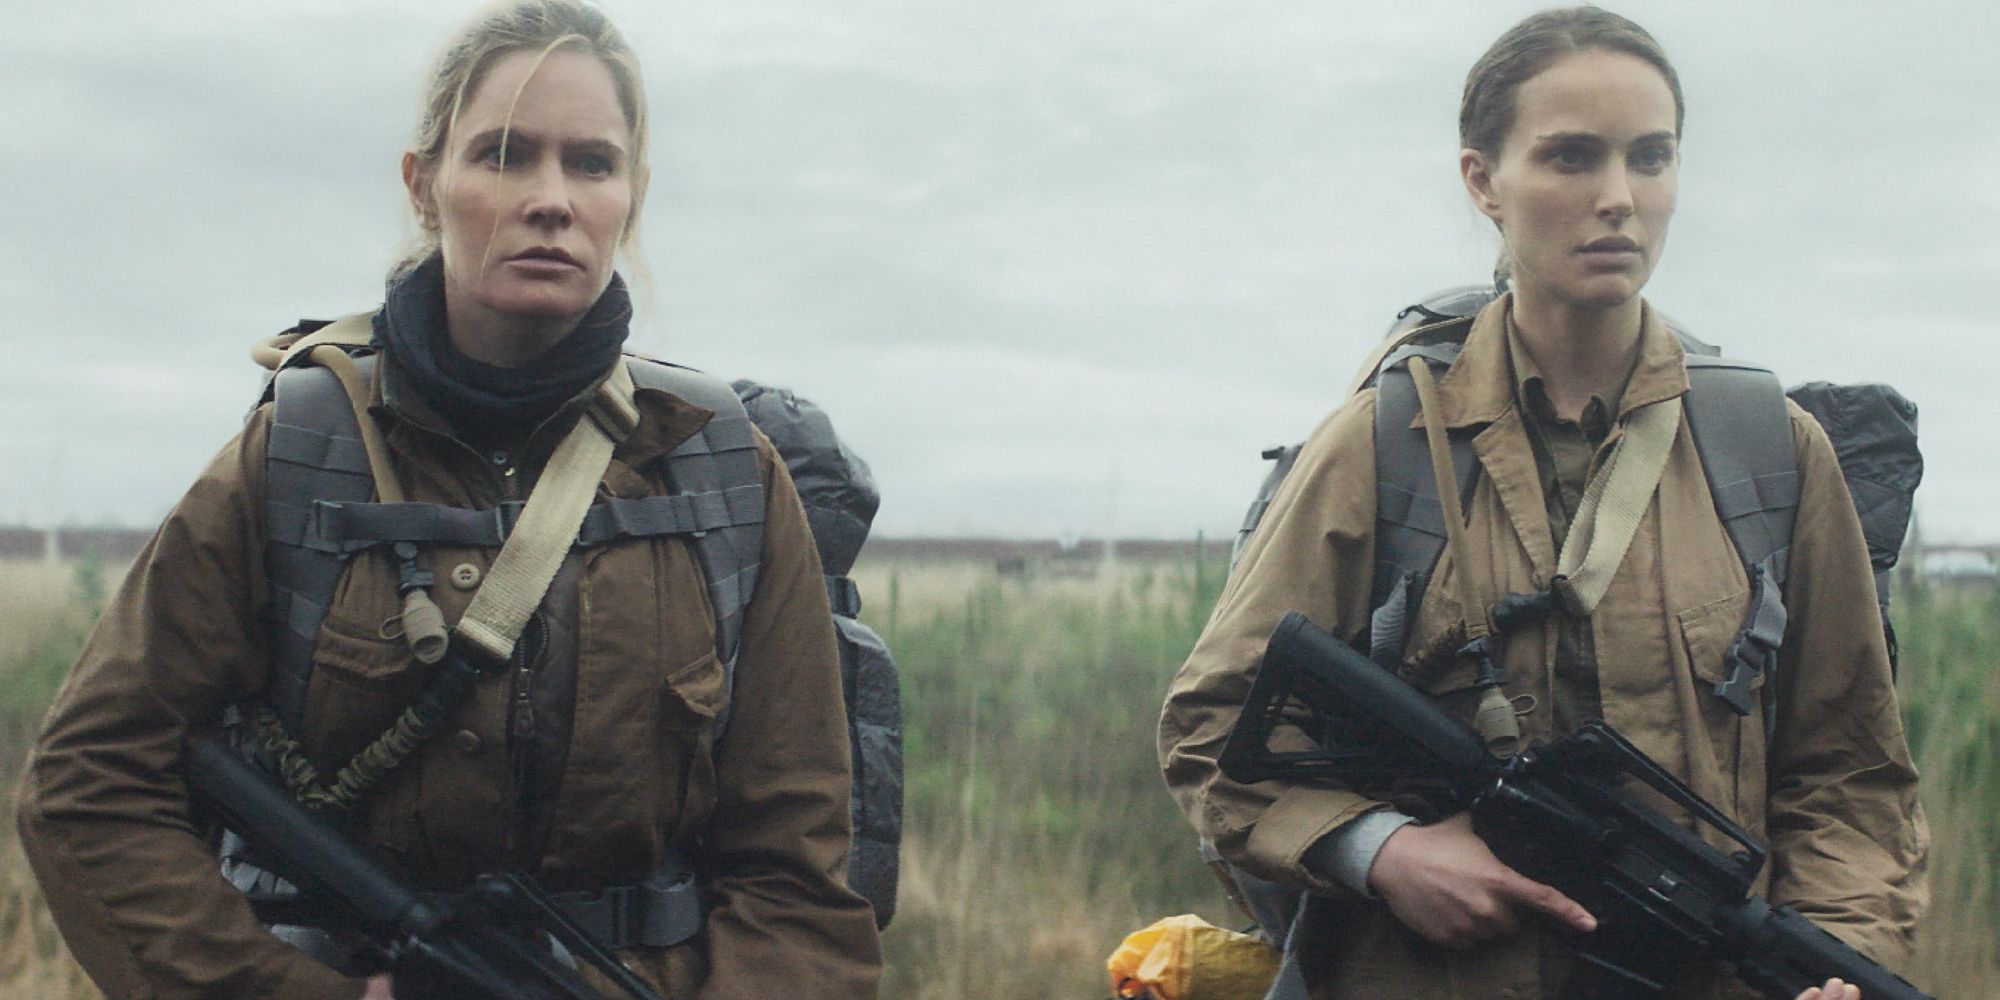 Actresses Tuva Novotny and Natalie Portman in 2018 sci-fi film &quot;Annihilation&quot; directed by Alex Garland